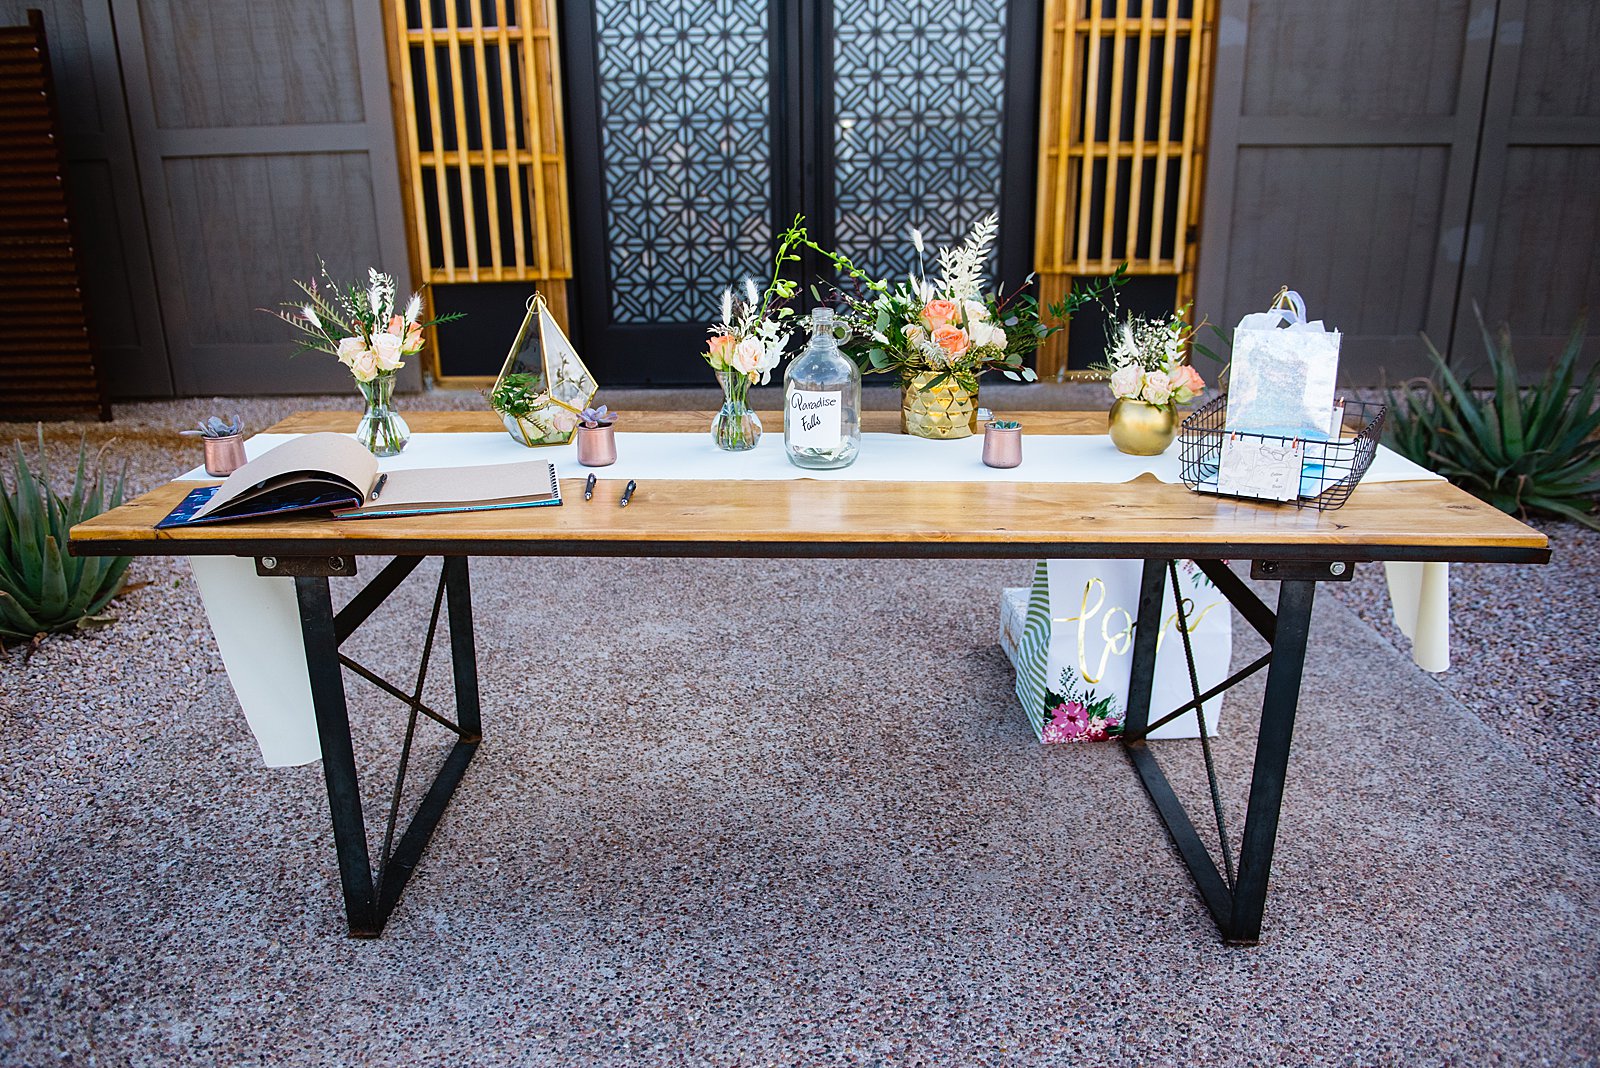 Disney's up themed gift table at The Paseo wedding reception by Apache Junction wedding photographer PMA Photography.